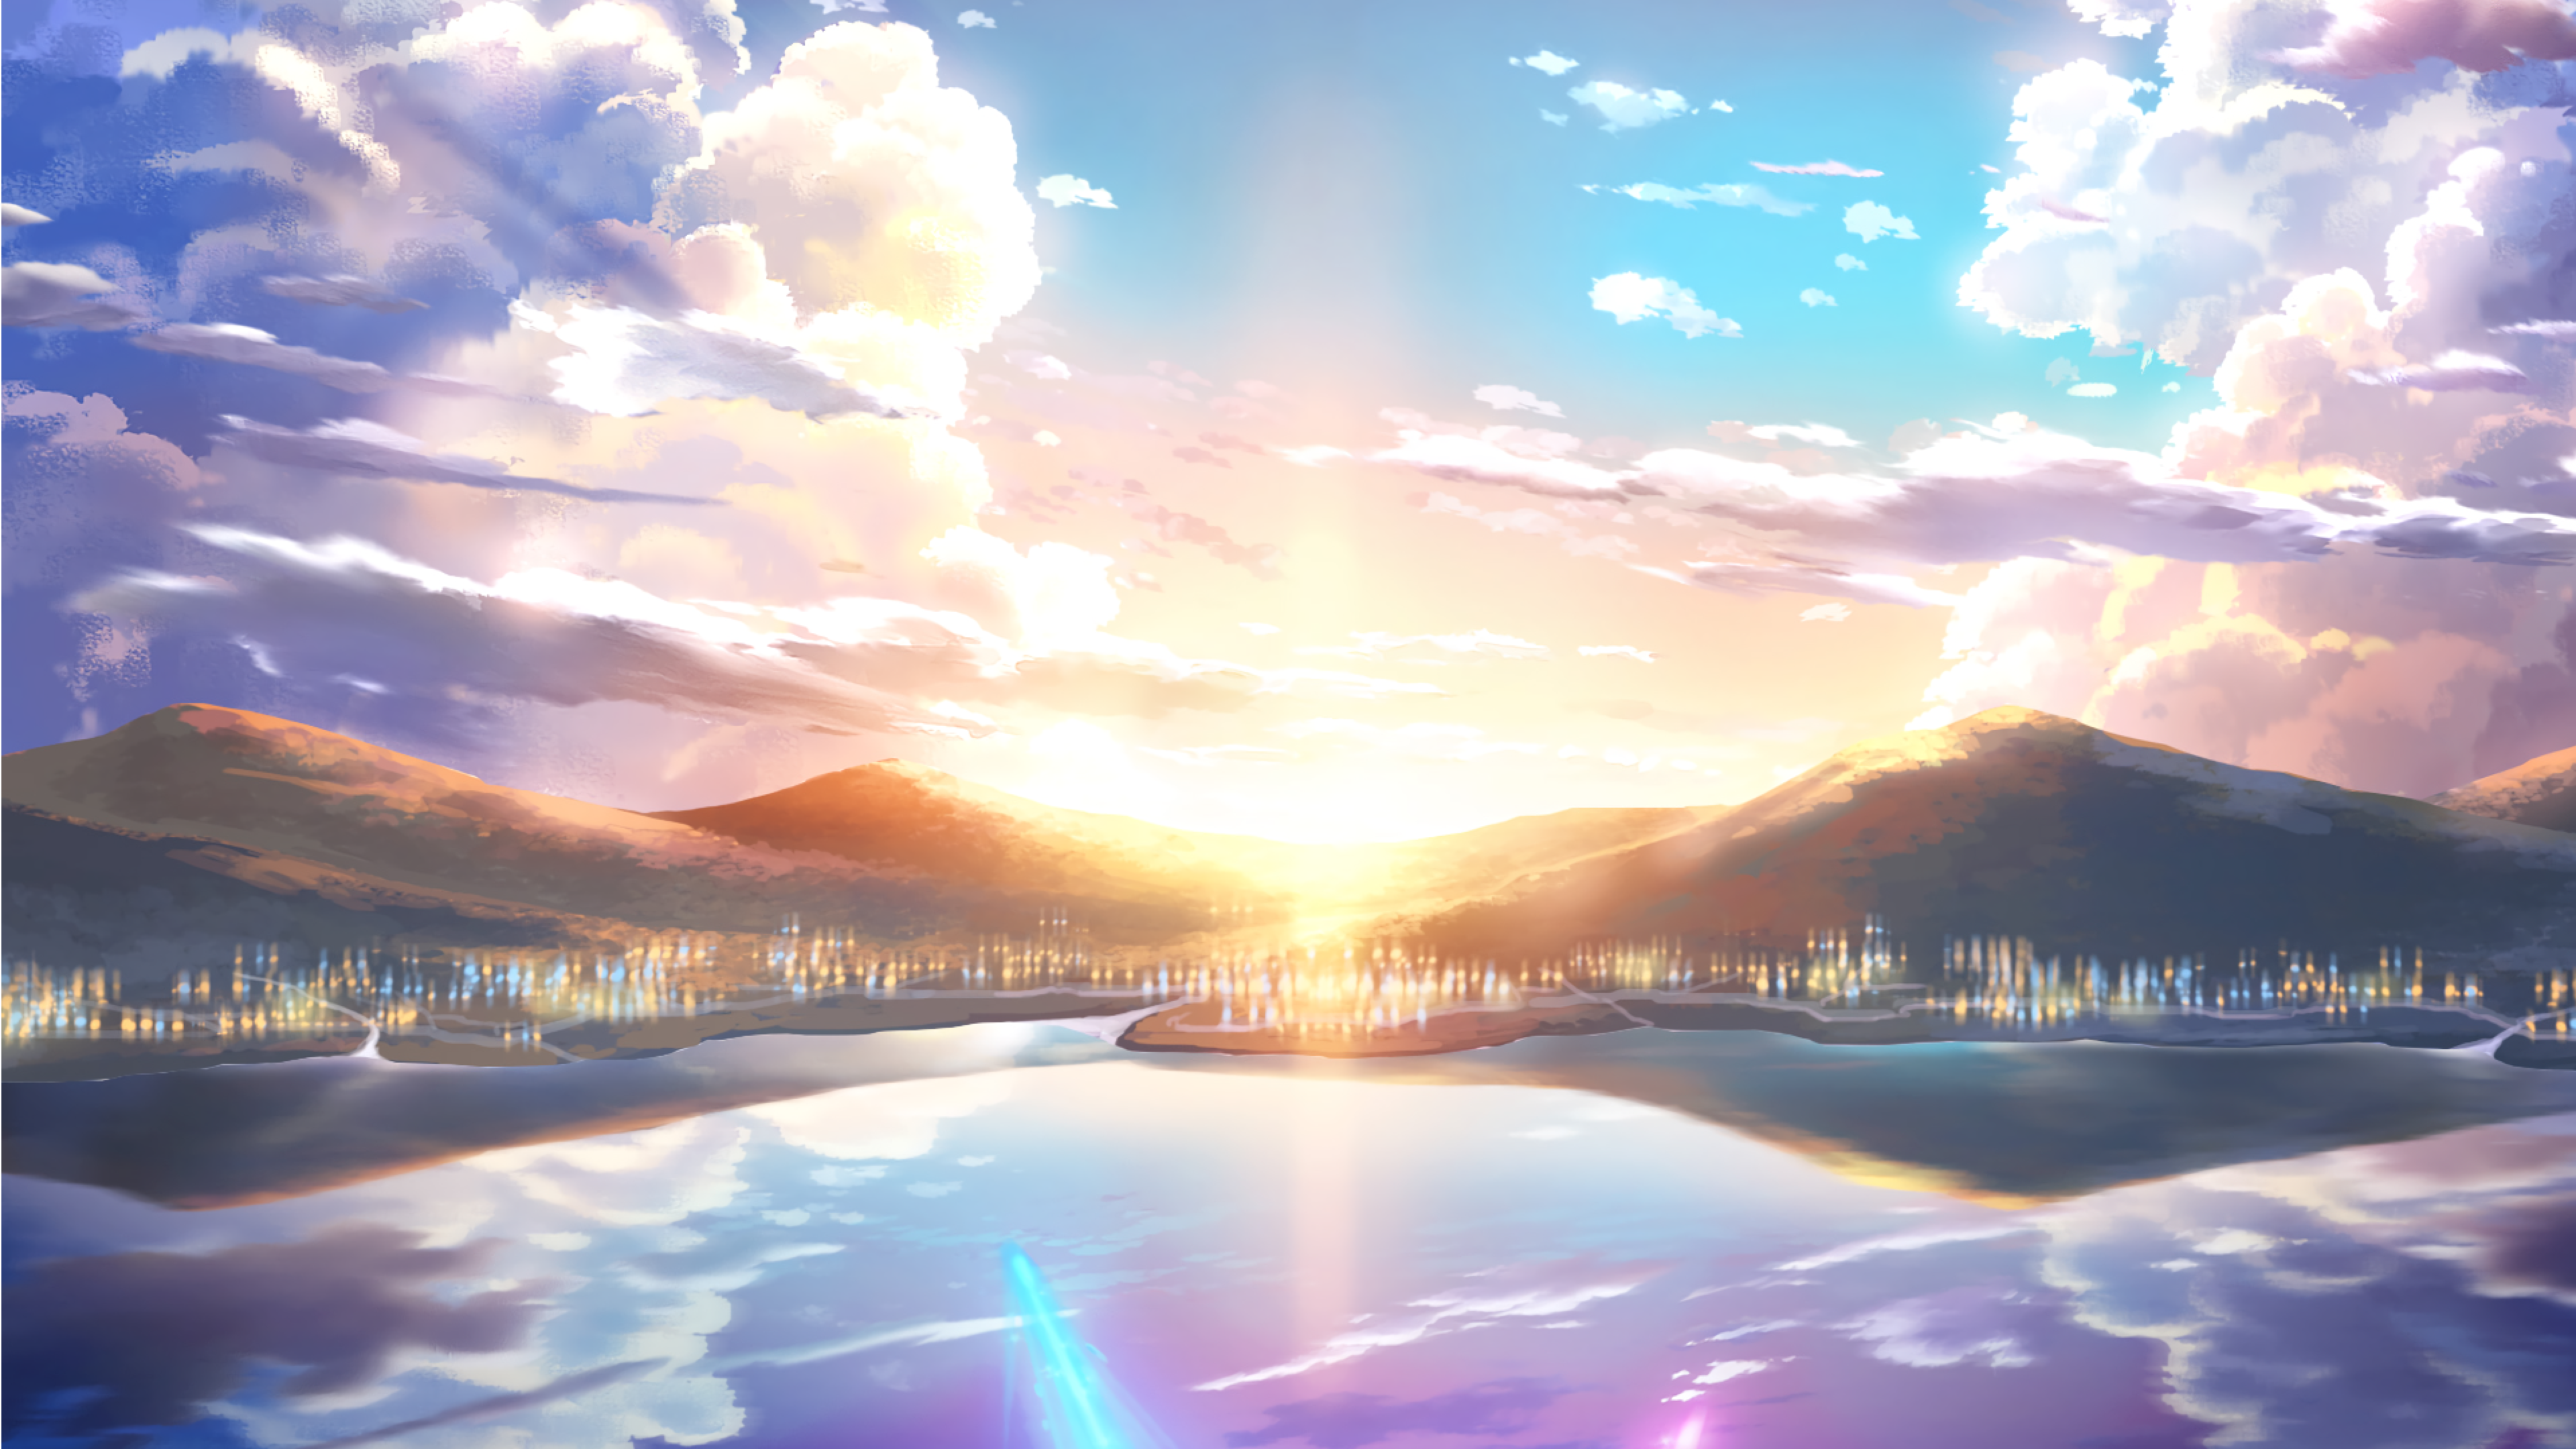 Your Name Ultra HD Wallpapers - Wallpaper Cave